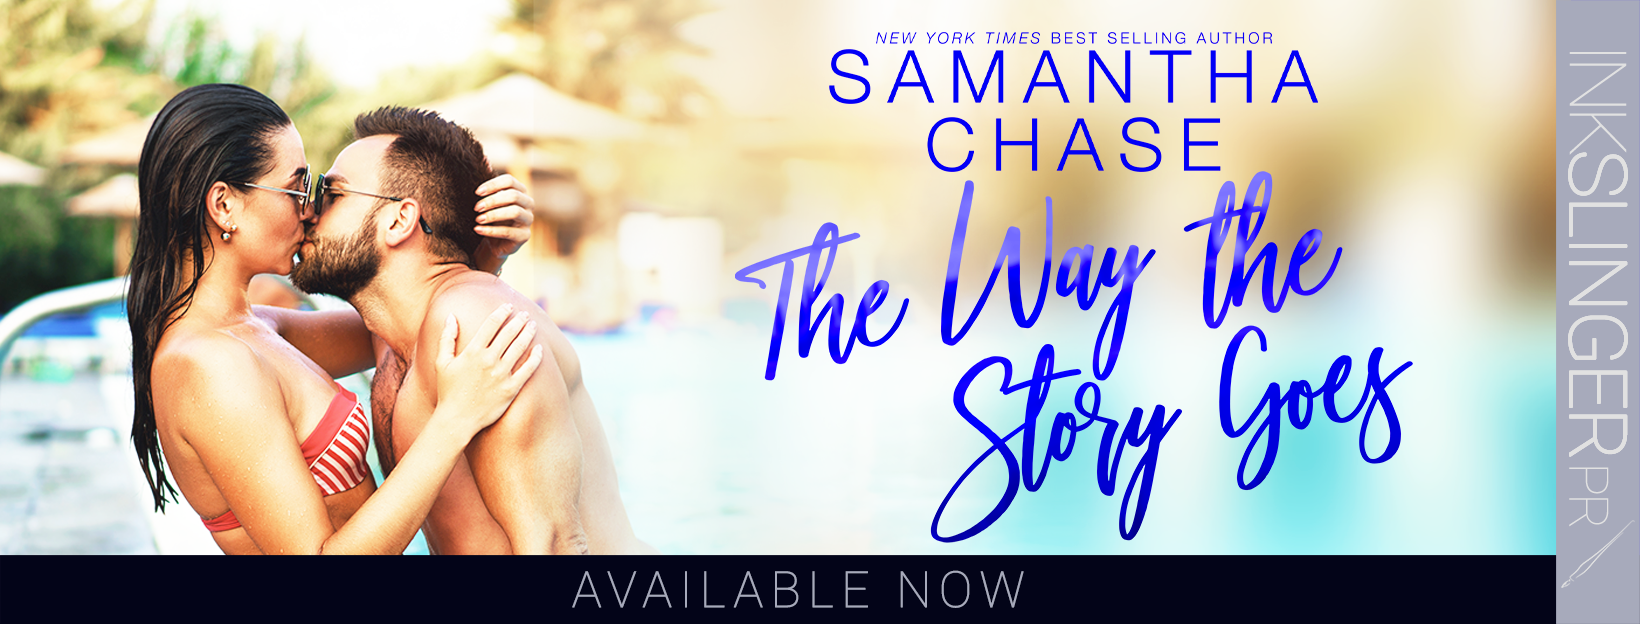 TheWayTheStoryGoes Banner Live 1 The Way the Story Goes: A Magnolia Sound Novel by New York Times and USA Today bestselling Author Samantha Chase